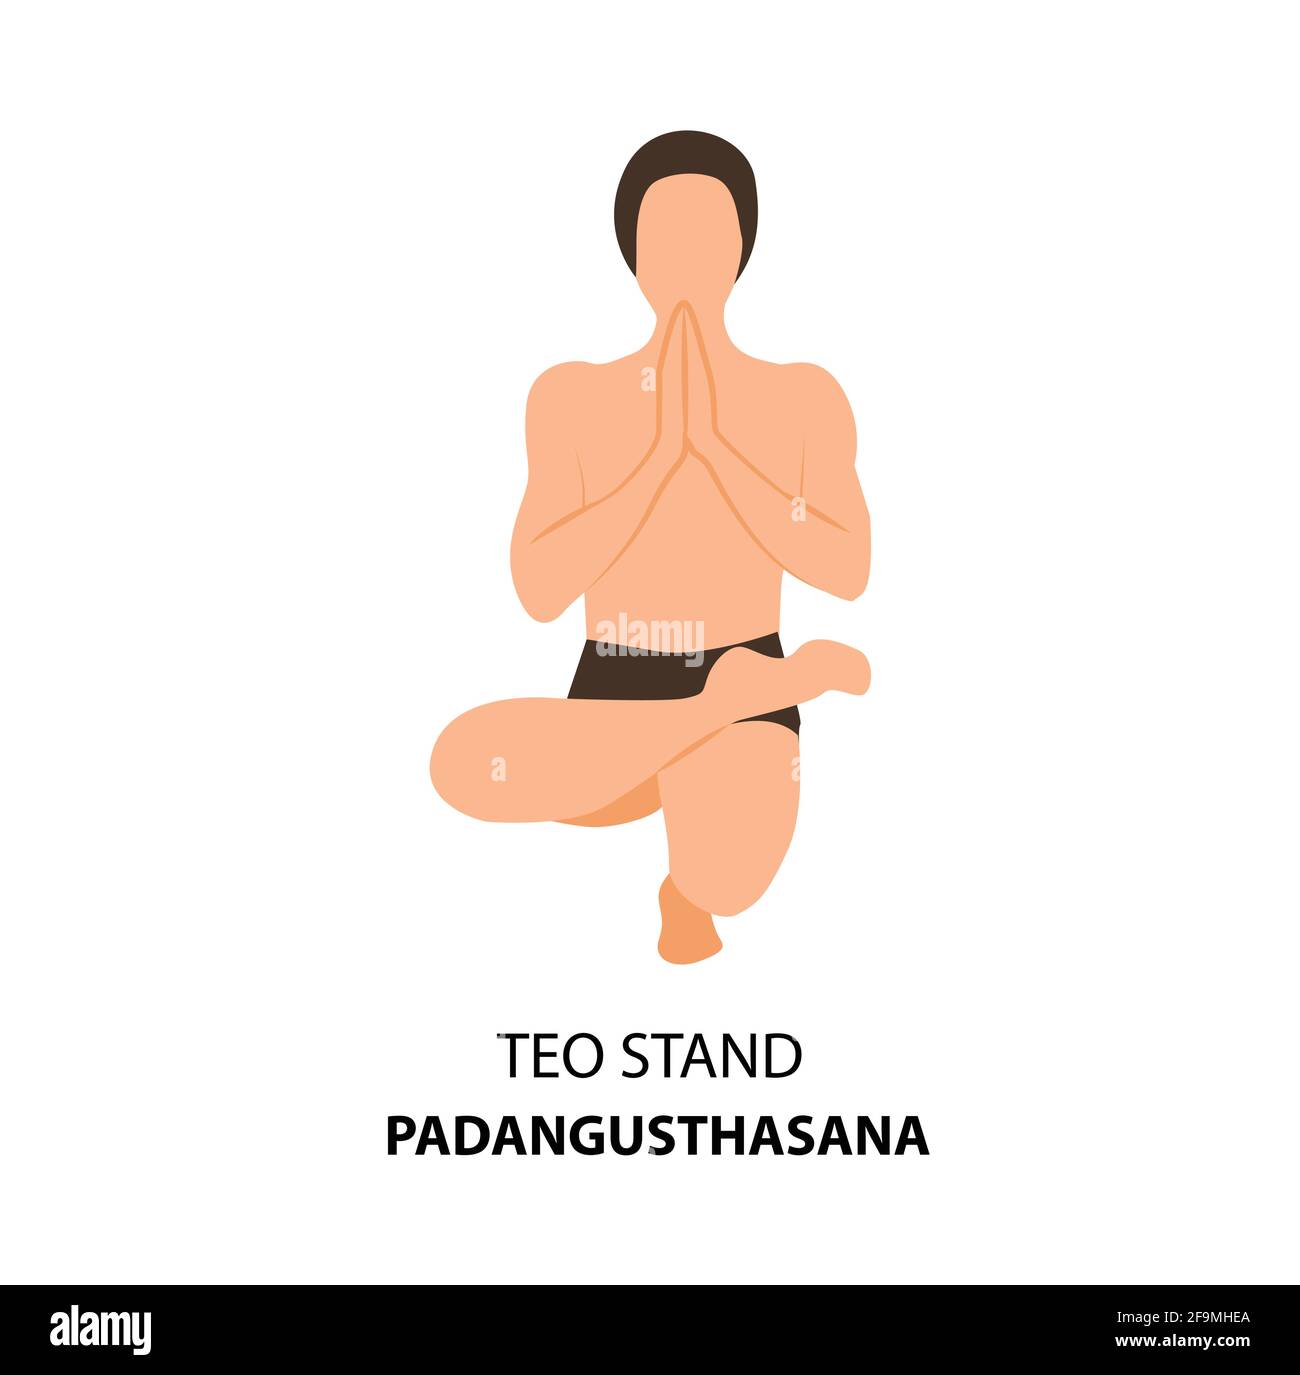 Man practicing yoga pose isolated Vector Illustration. Man standing in teo stand pose or padangusthasana pose, Yoga Asana icon Stock Vector